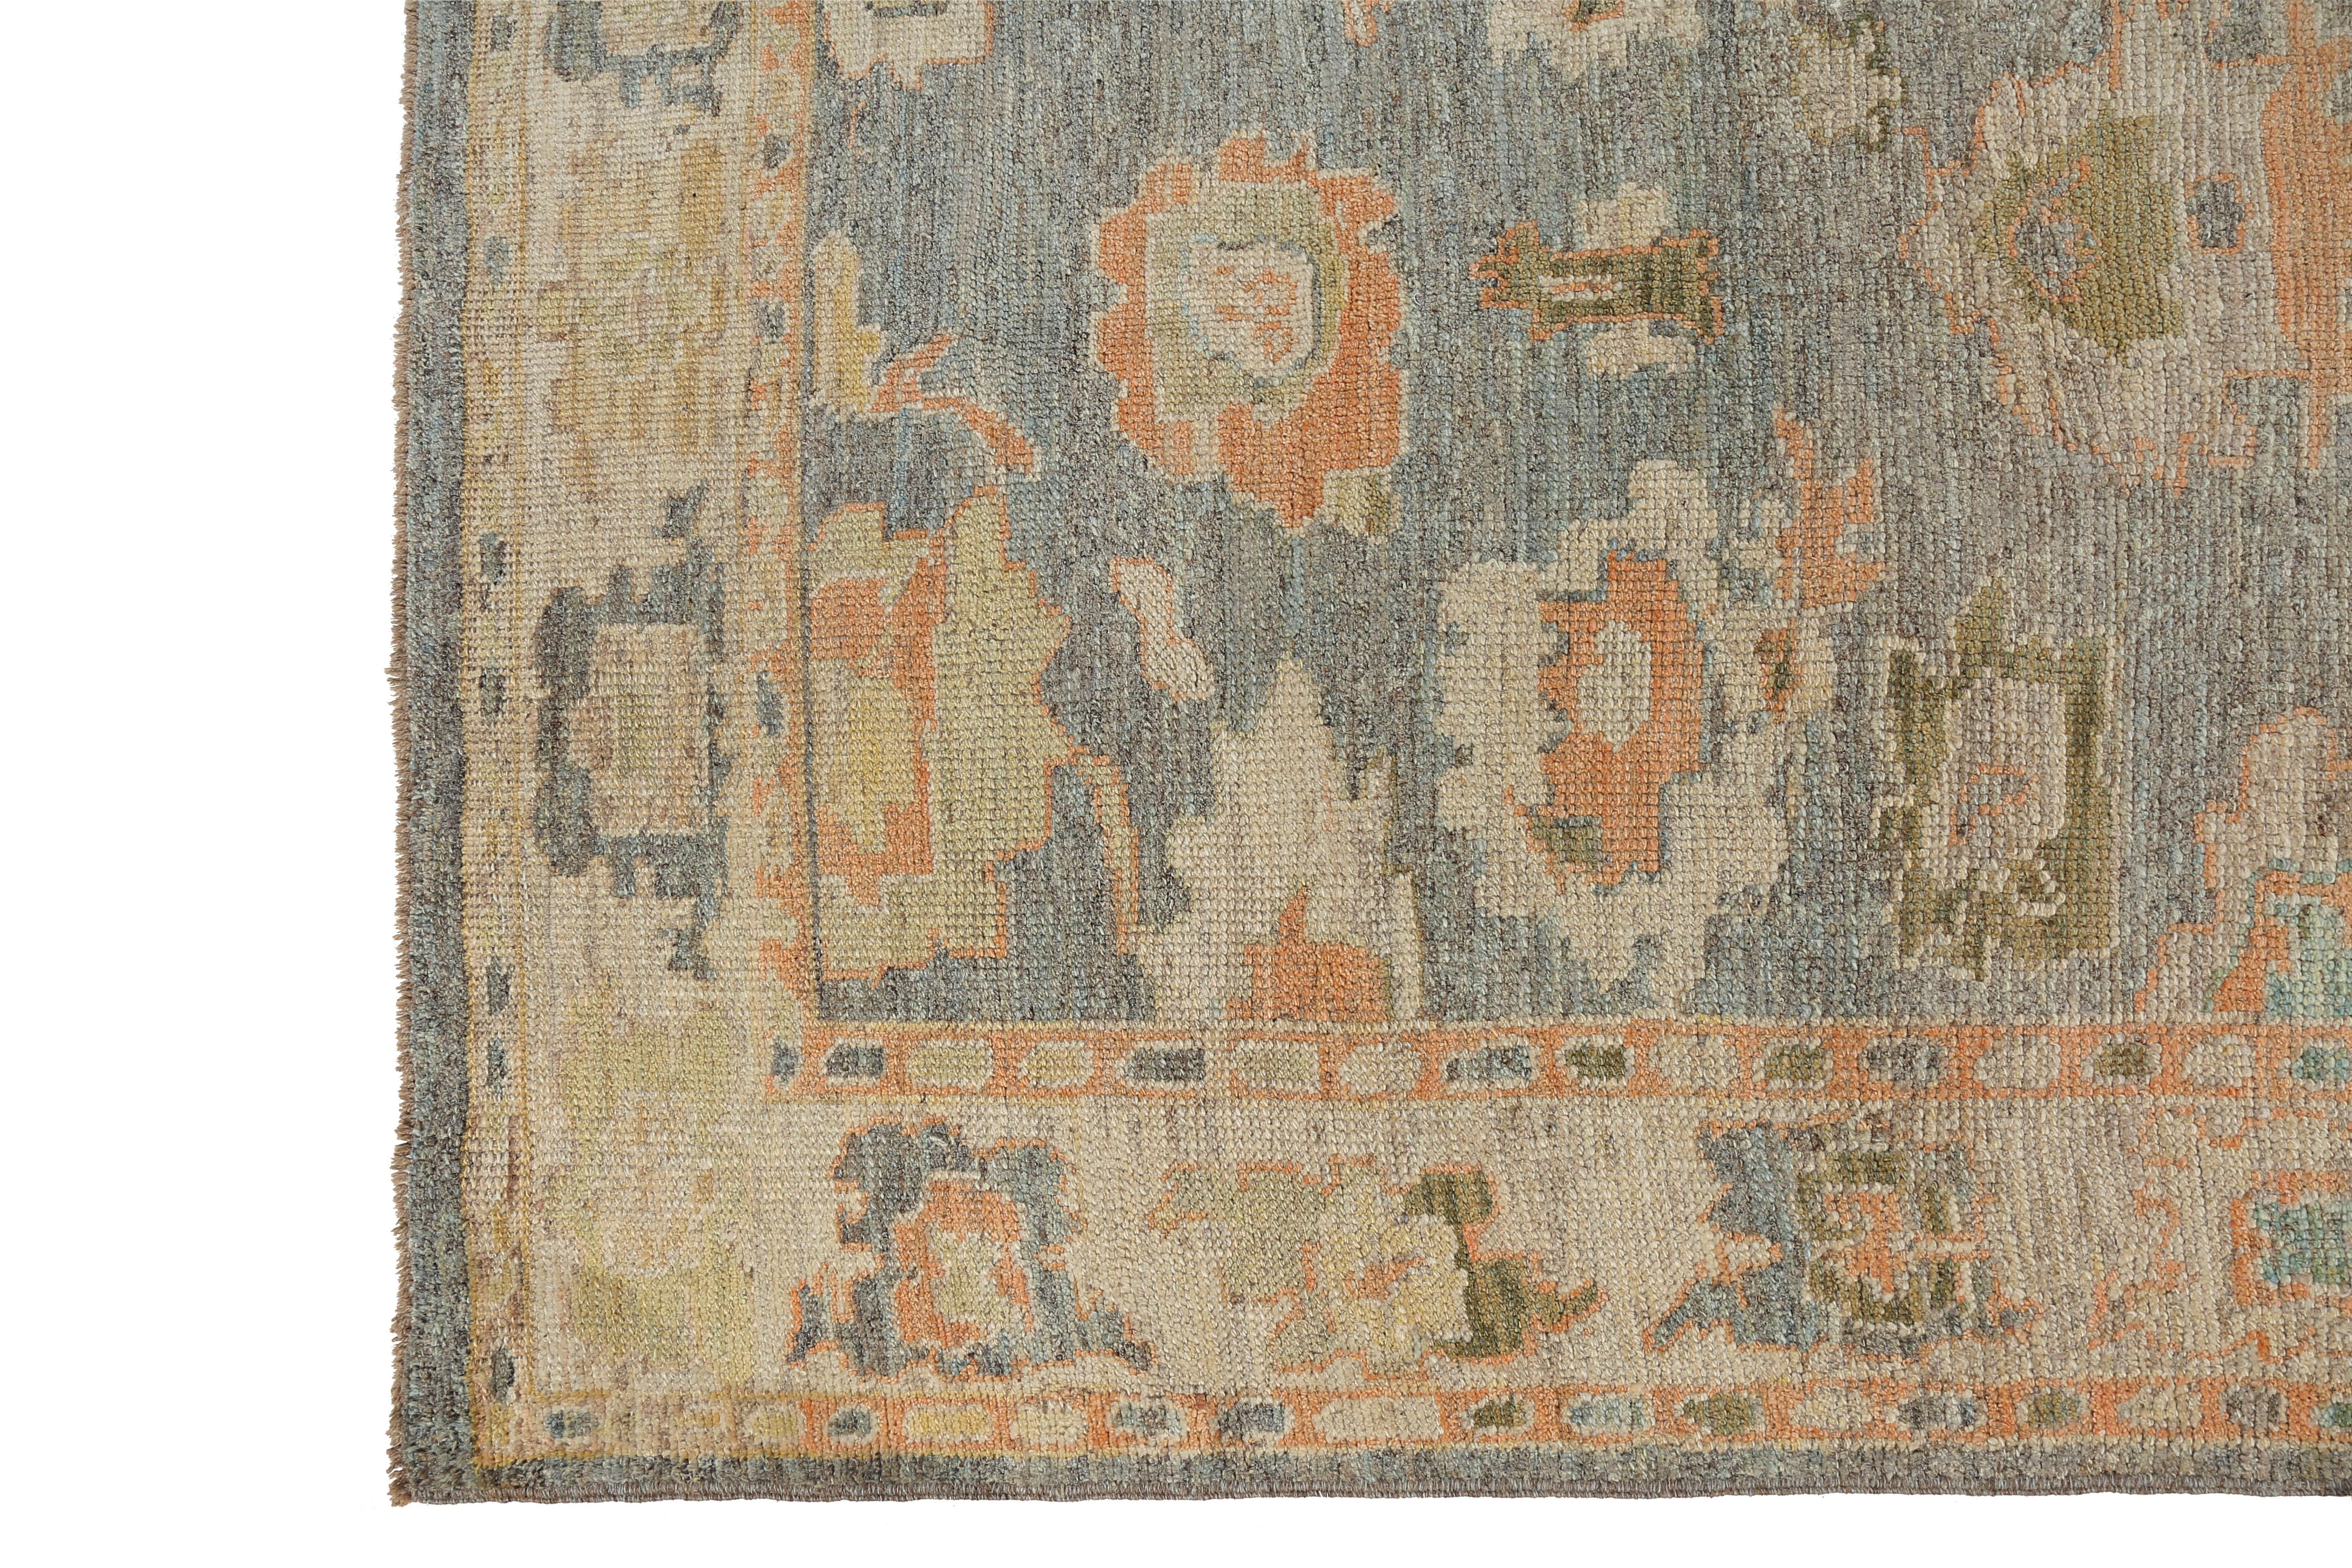 Introducing our handmade Turkish Oushak rug, measuring 5'0'' x 7'2''. This exquisite piece features a stunning grey background with delicate pastel color tones in coral orange, yellow, and green. The intricate design showcases the skilled